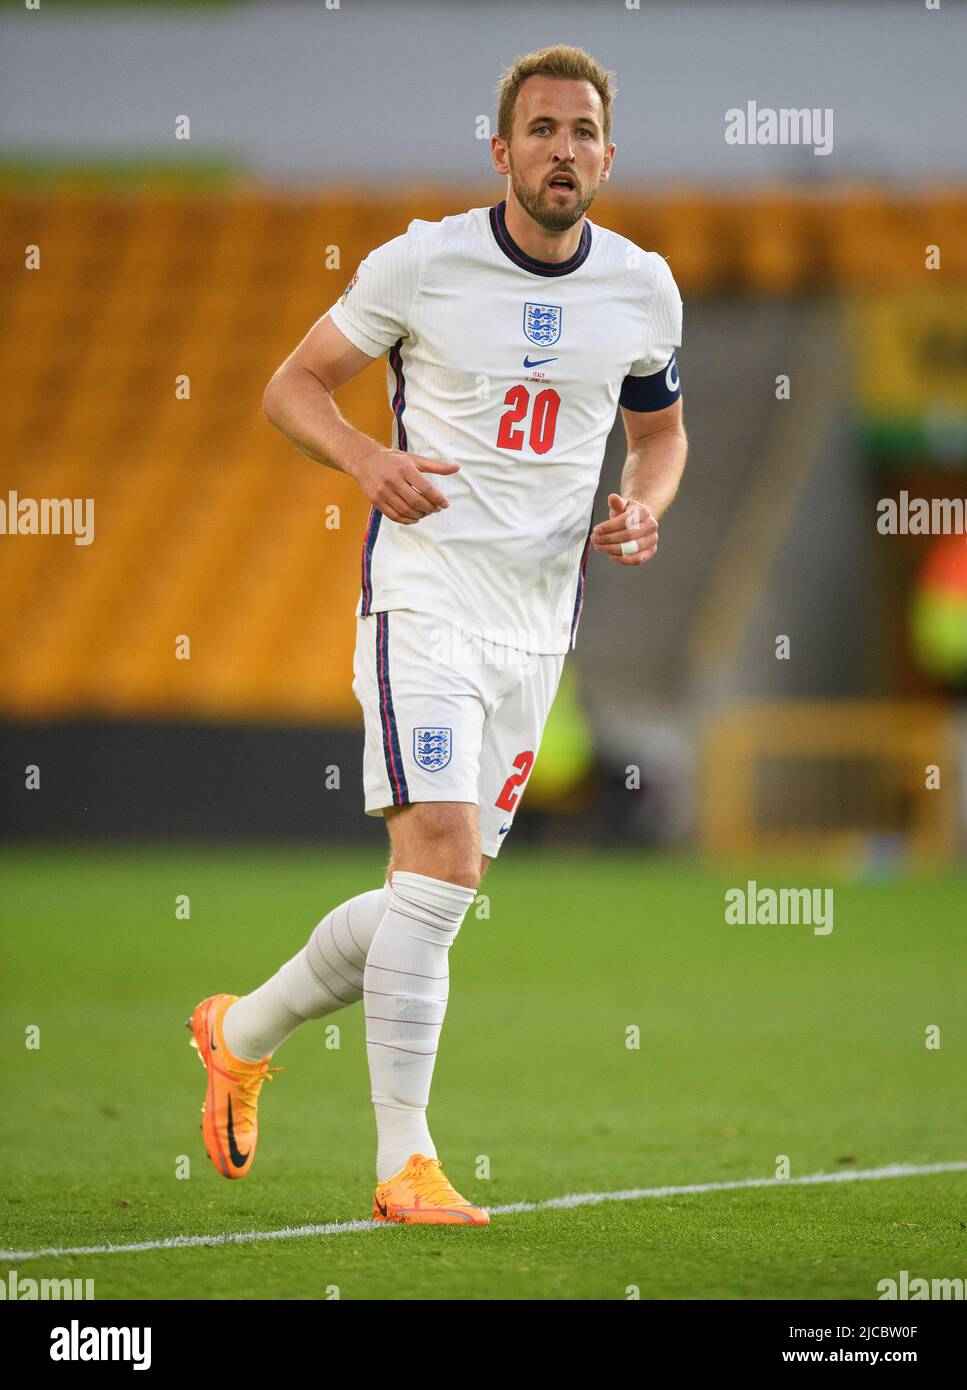 11 Jun 2022 - England v Italy - UEFA Nations League - Group 3 - Molineux Stadium Harry Kane during the match against Italy. Picture Credit : © Mark Pain / Alamy Live News Stock Photo